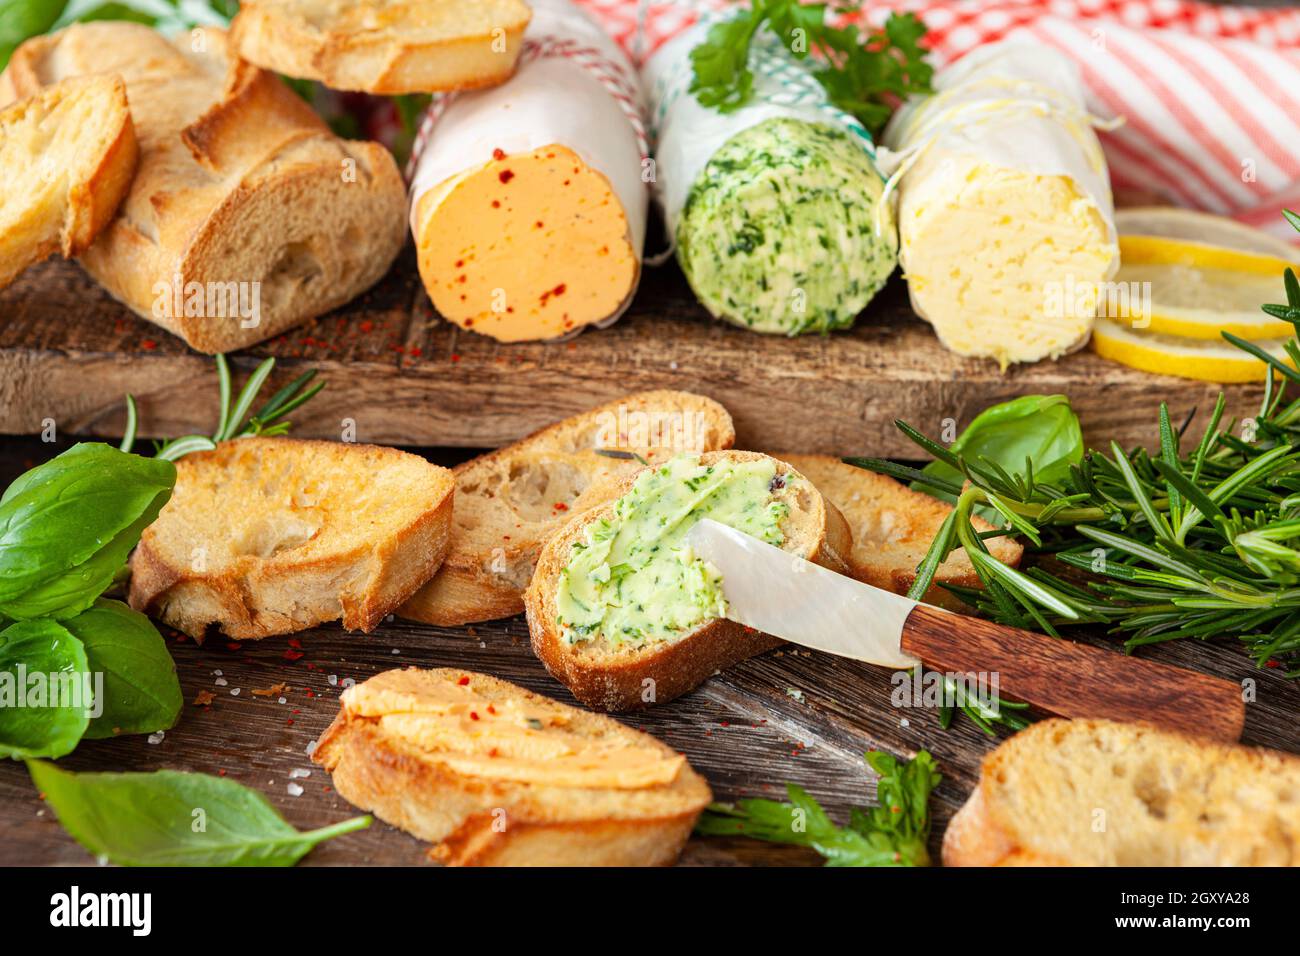 Homemade herb butter with slices of roasted baguette Stock Photo